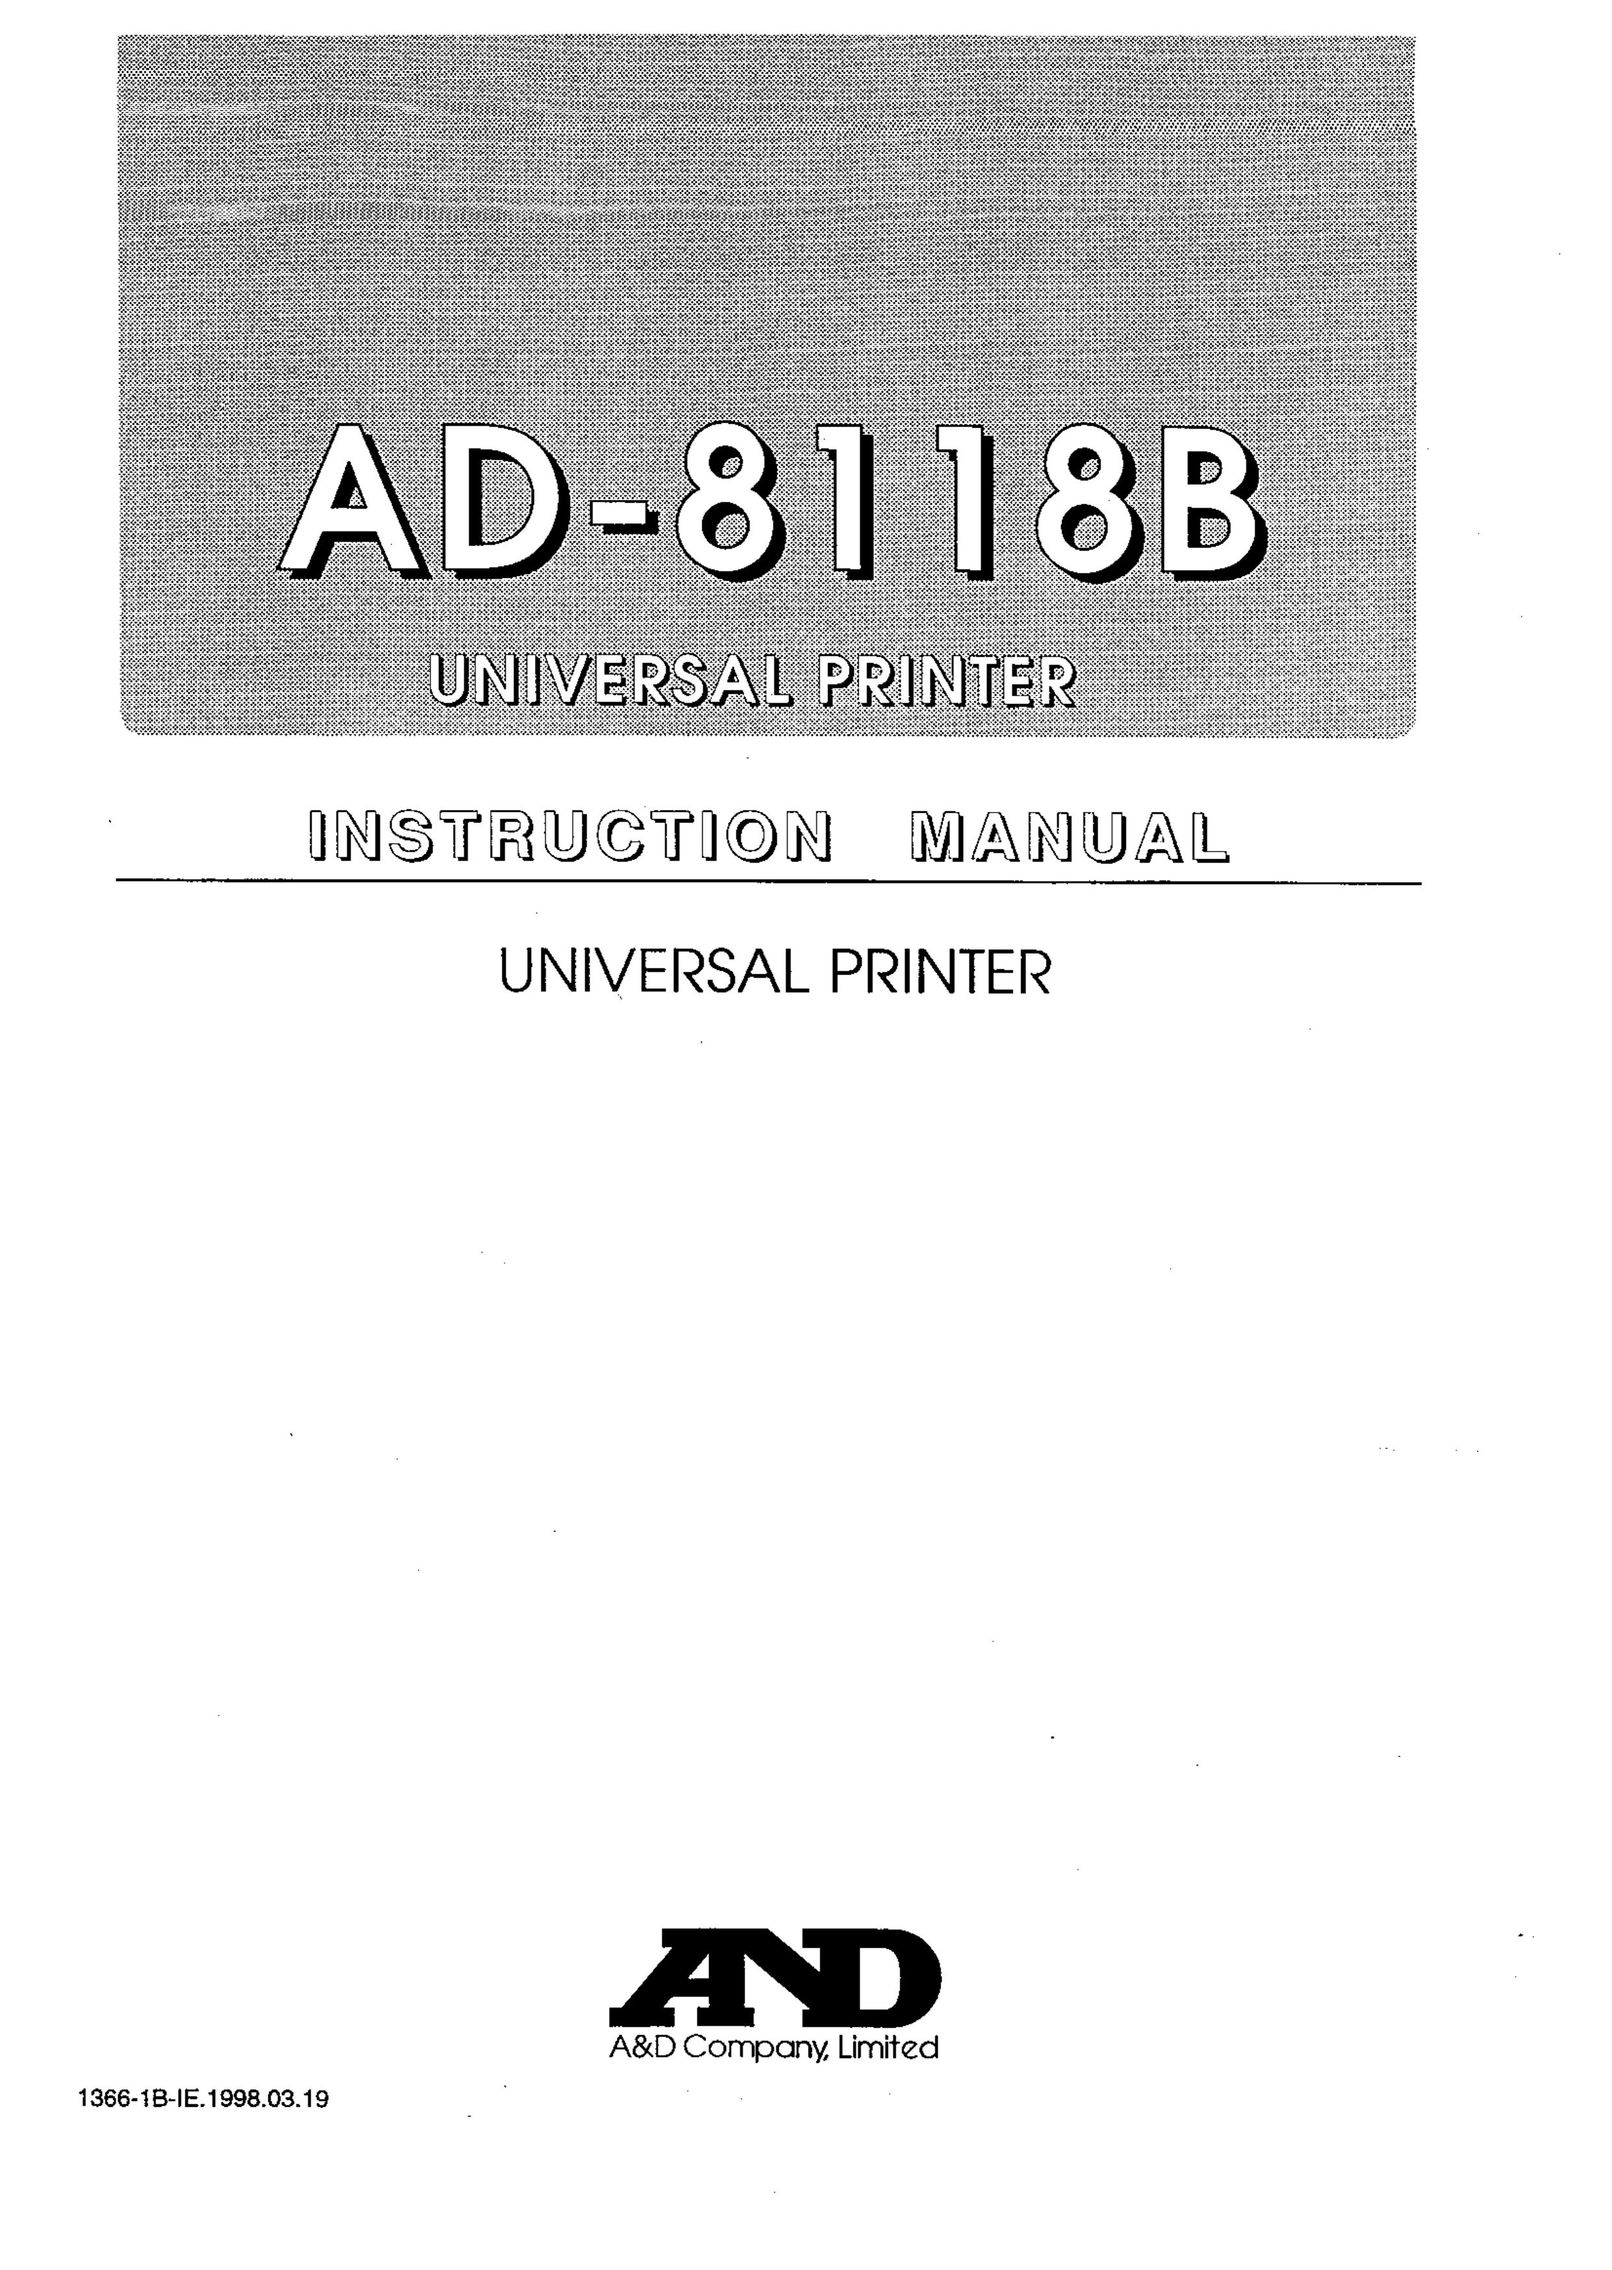 A&D AD-8118B All in One Printer User Manual